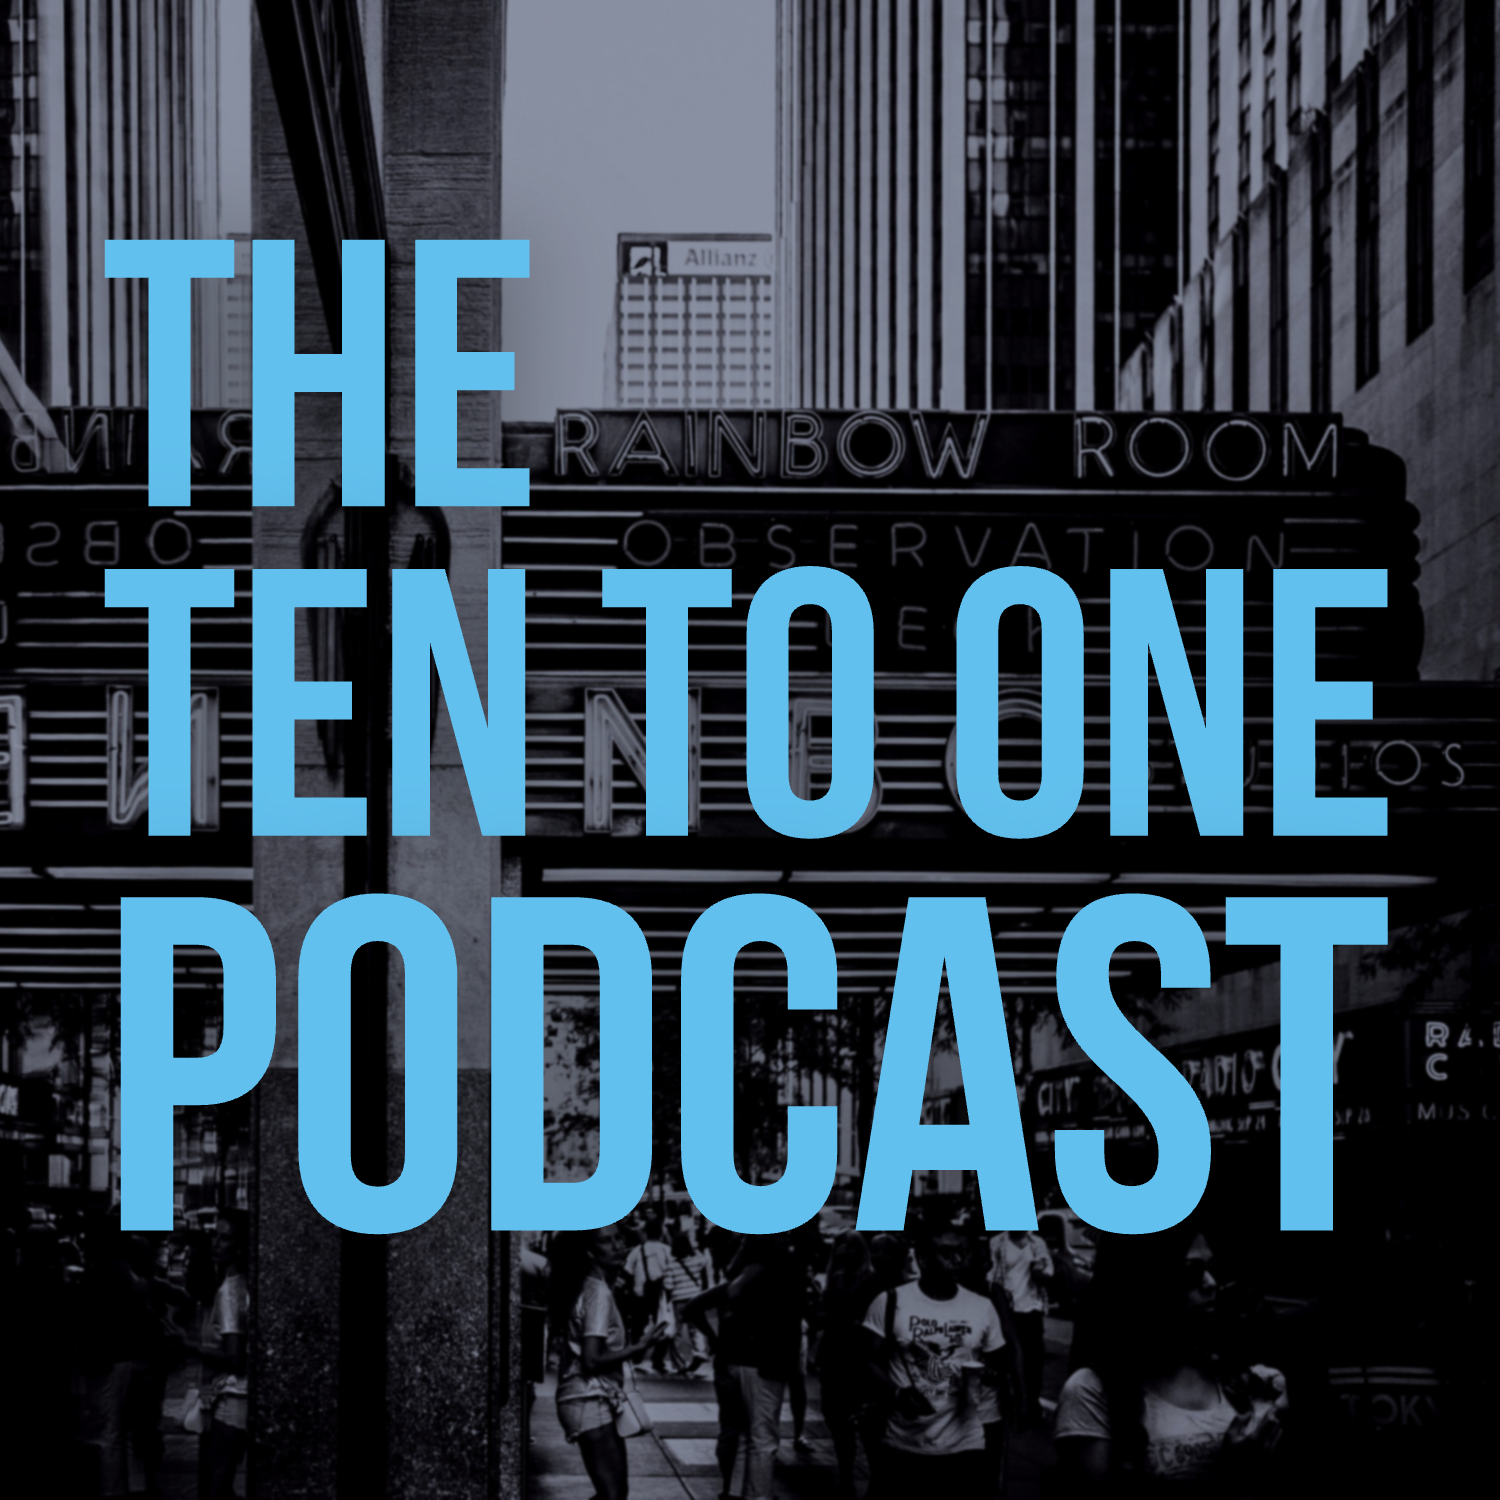 Show artwork for The Ten to One Podcast